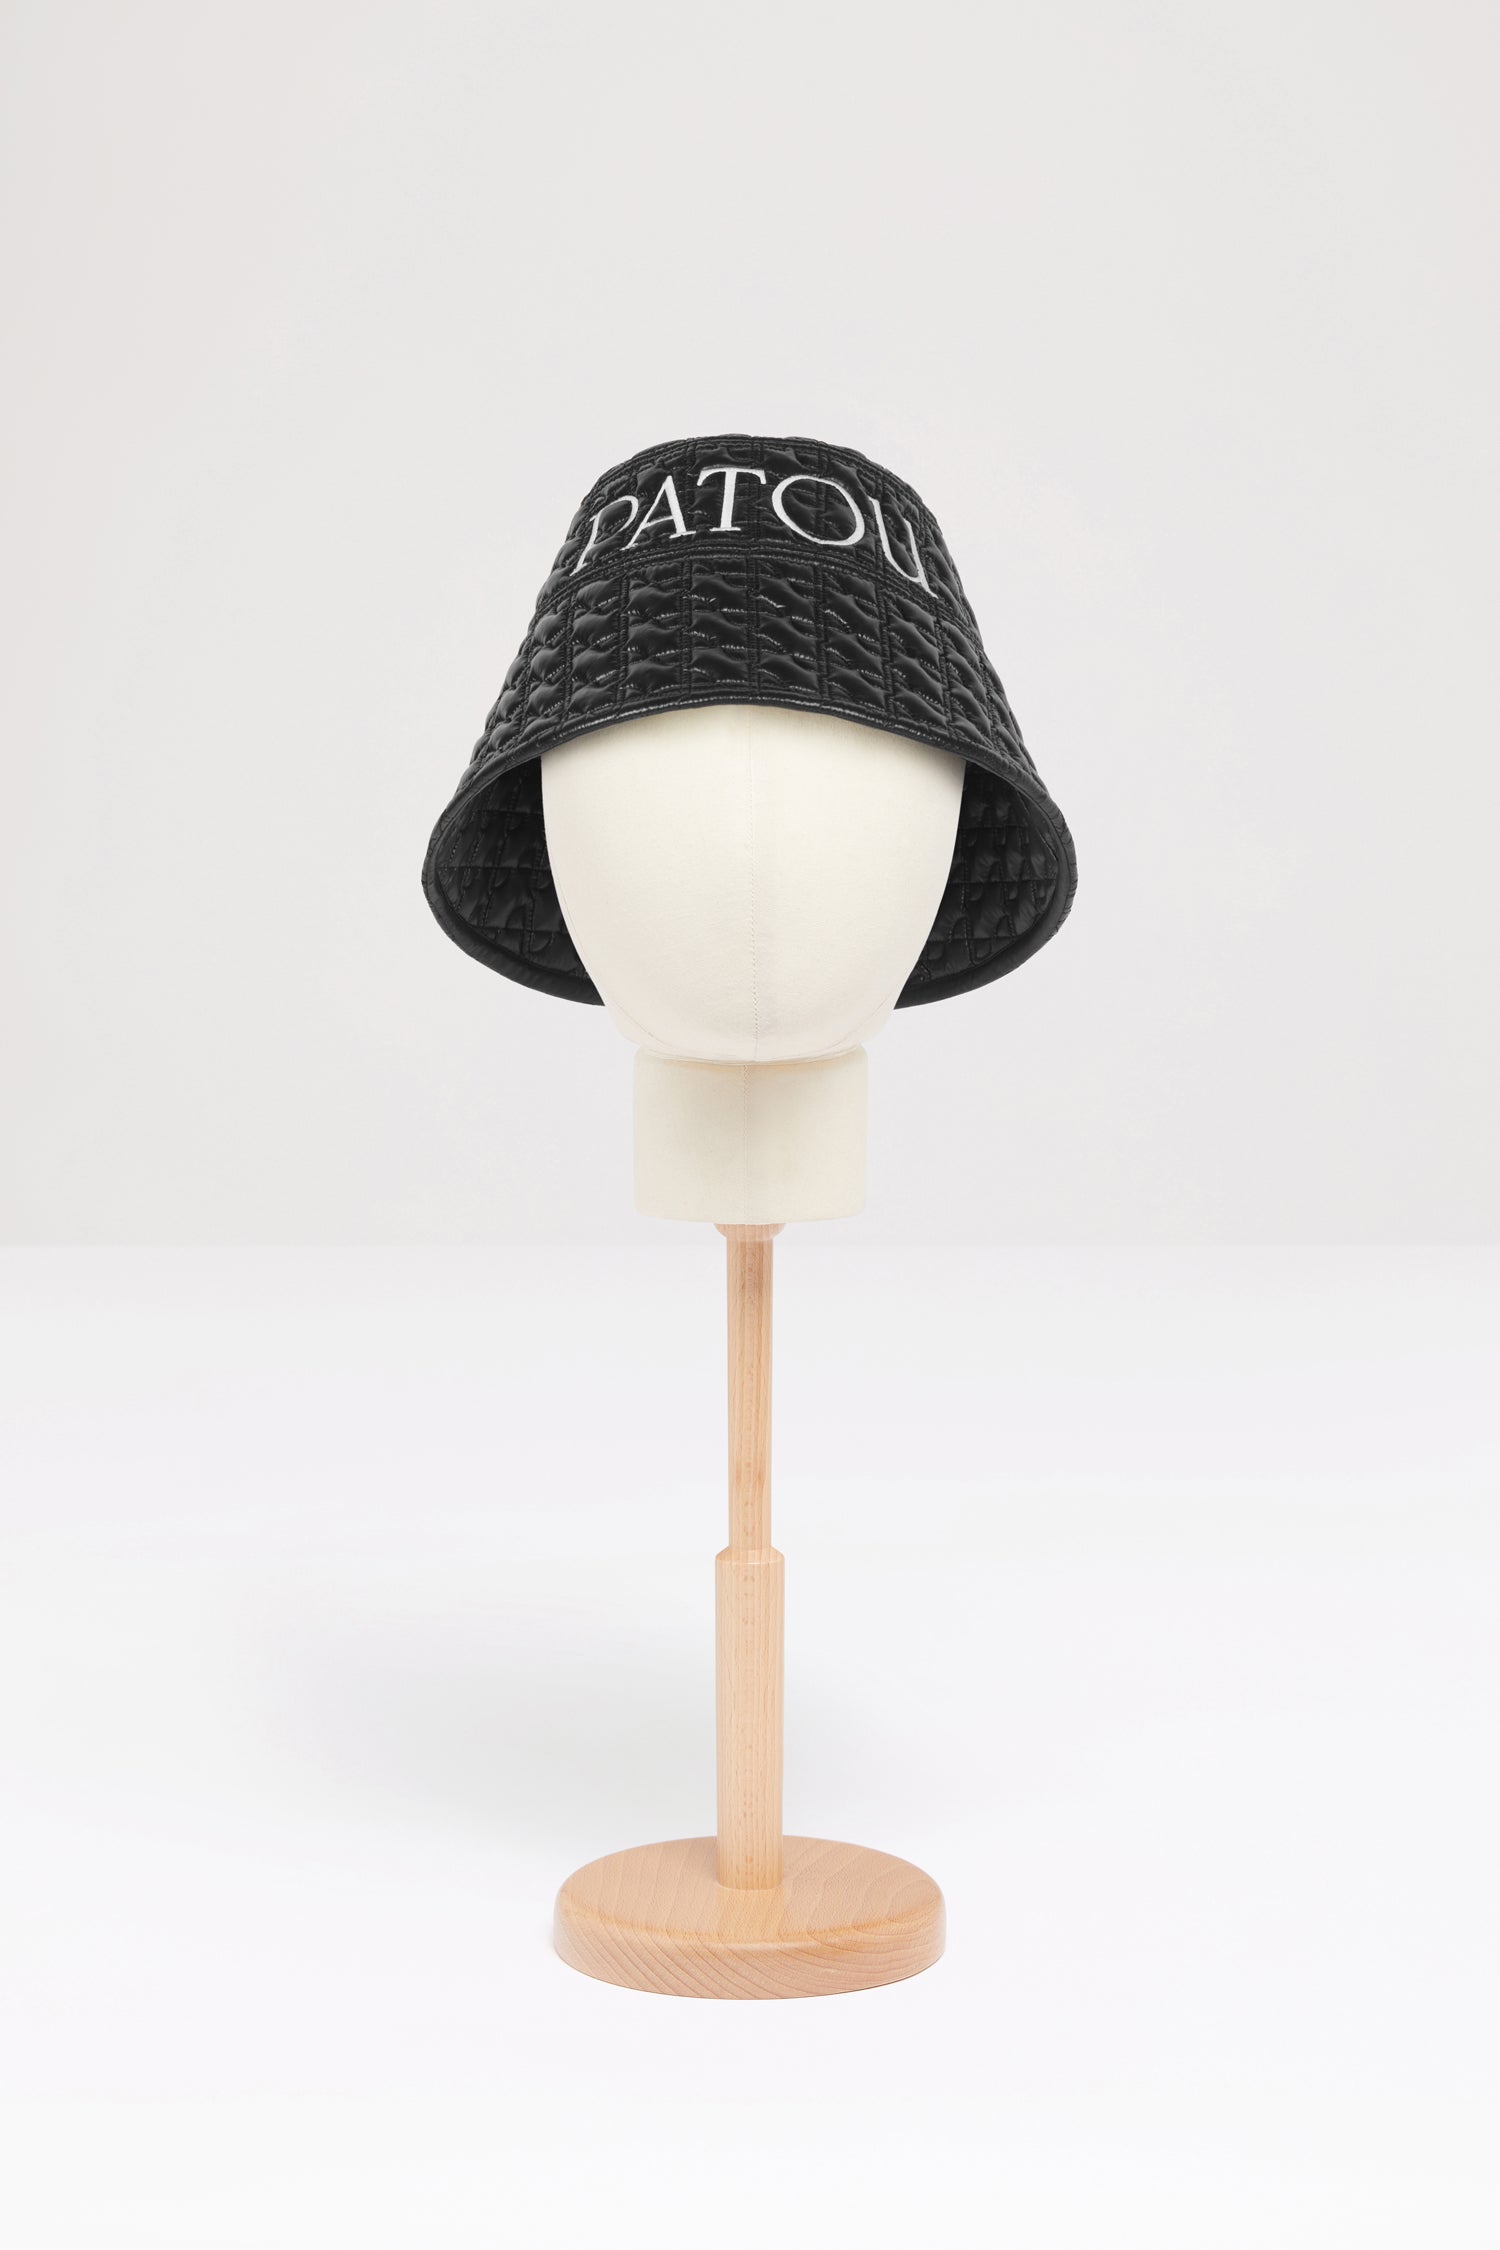 Patou bucket hat in eco-friendly quilted nylon - Black Ski Slope - S